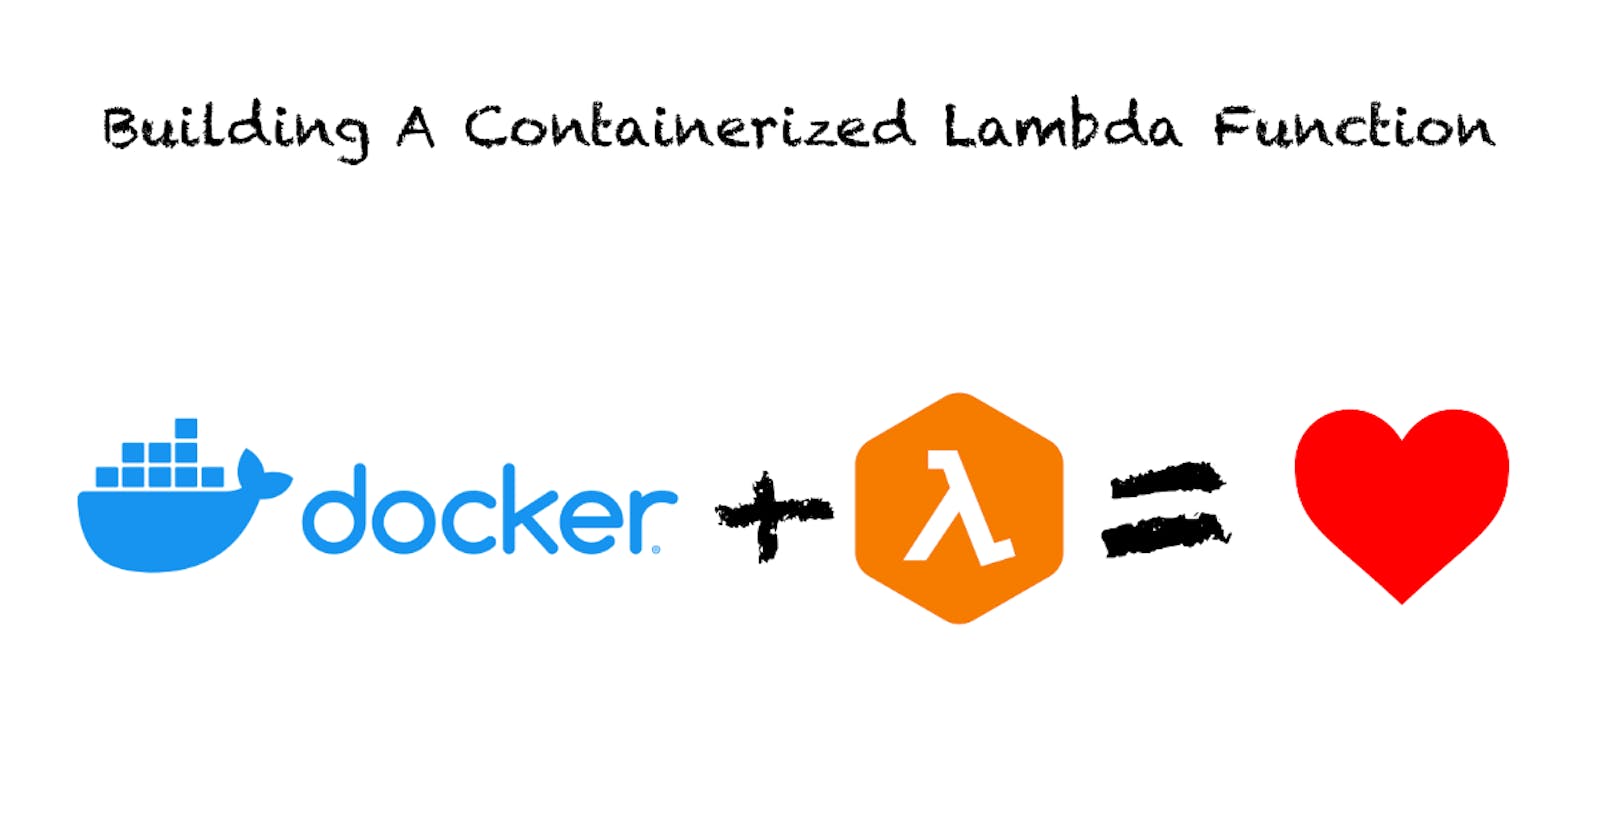 Building A Containerized Lambda Function